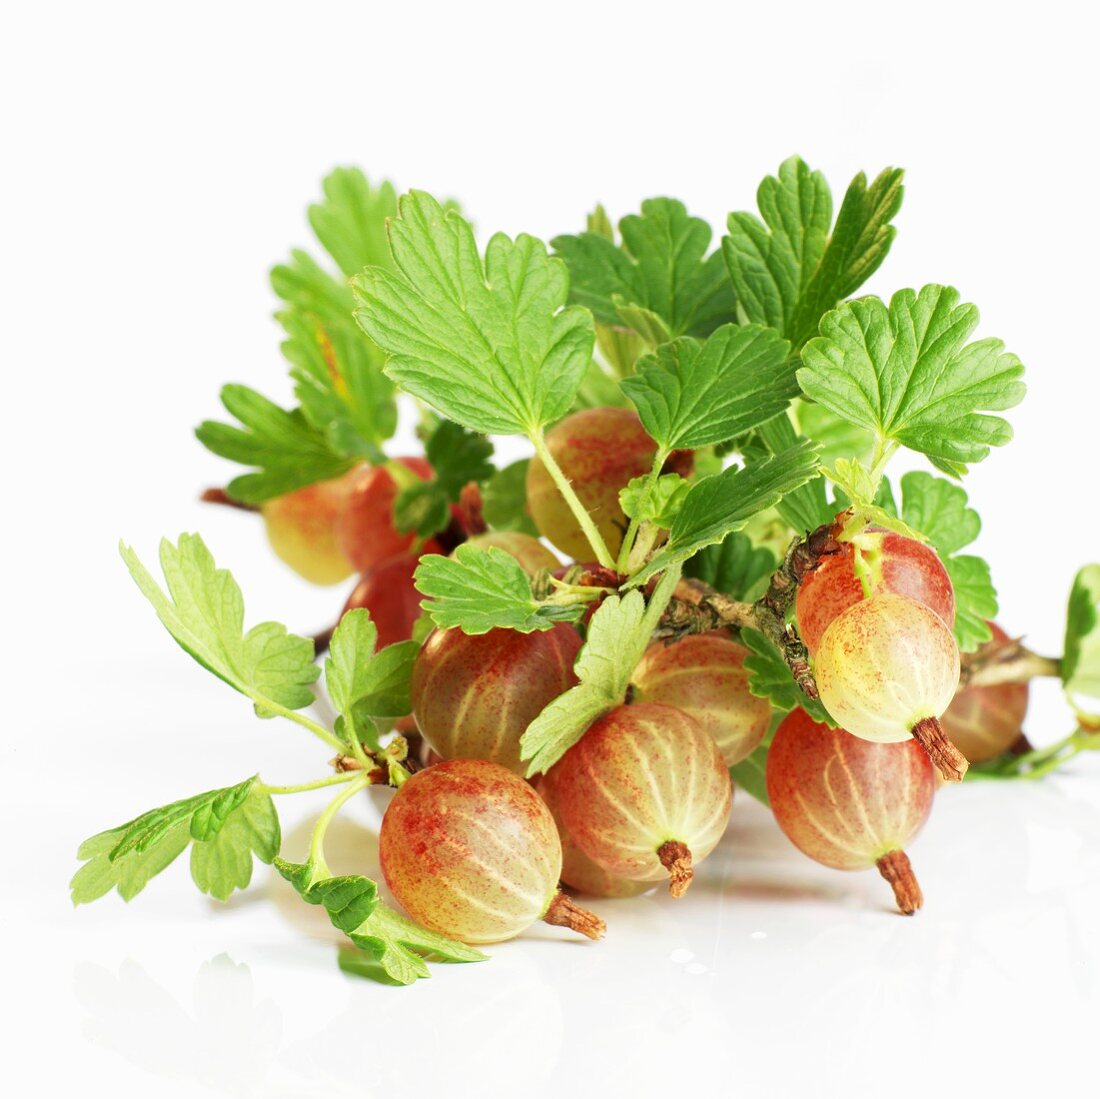 Gooseberries with leaves